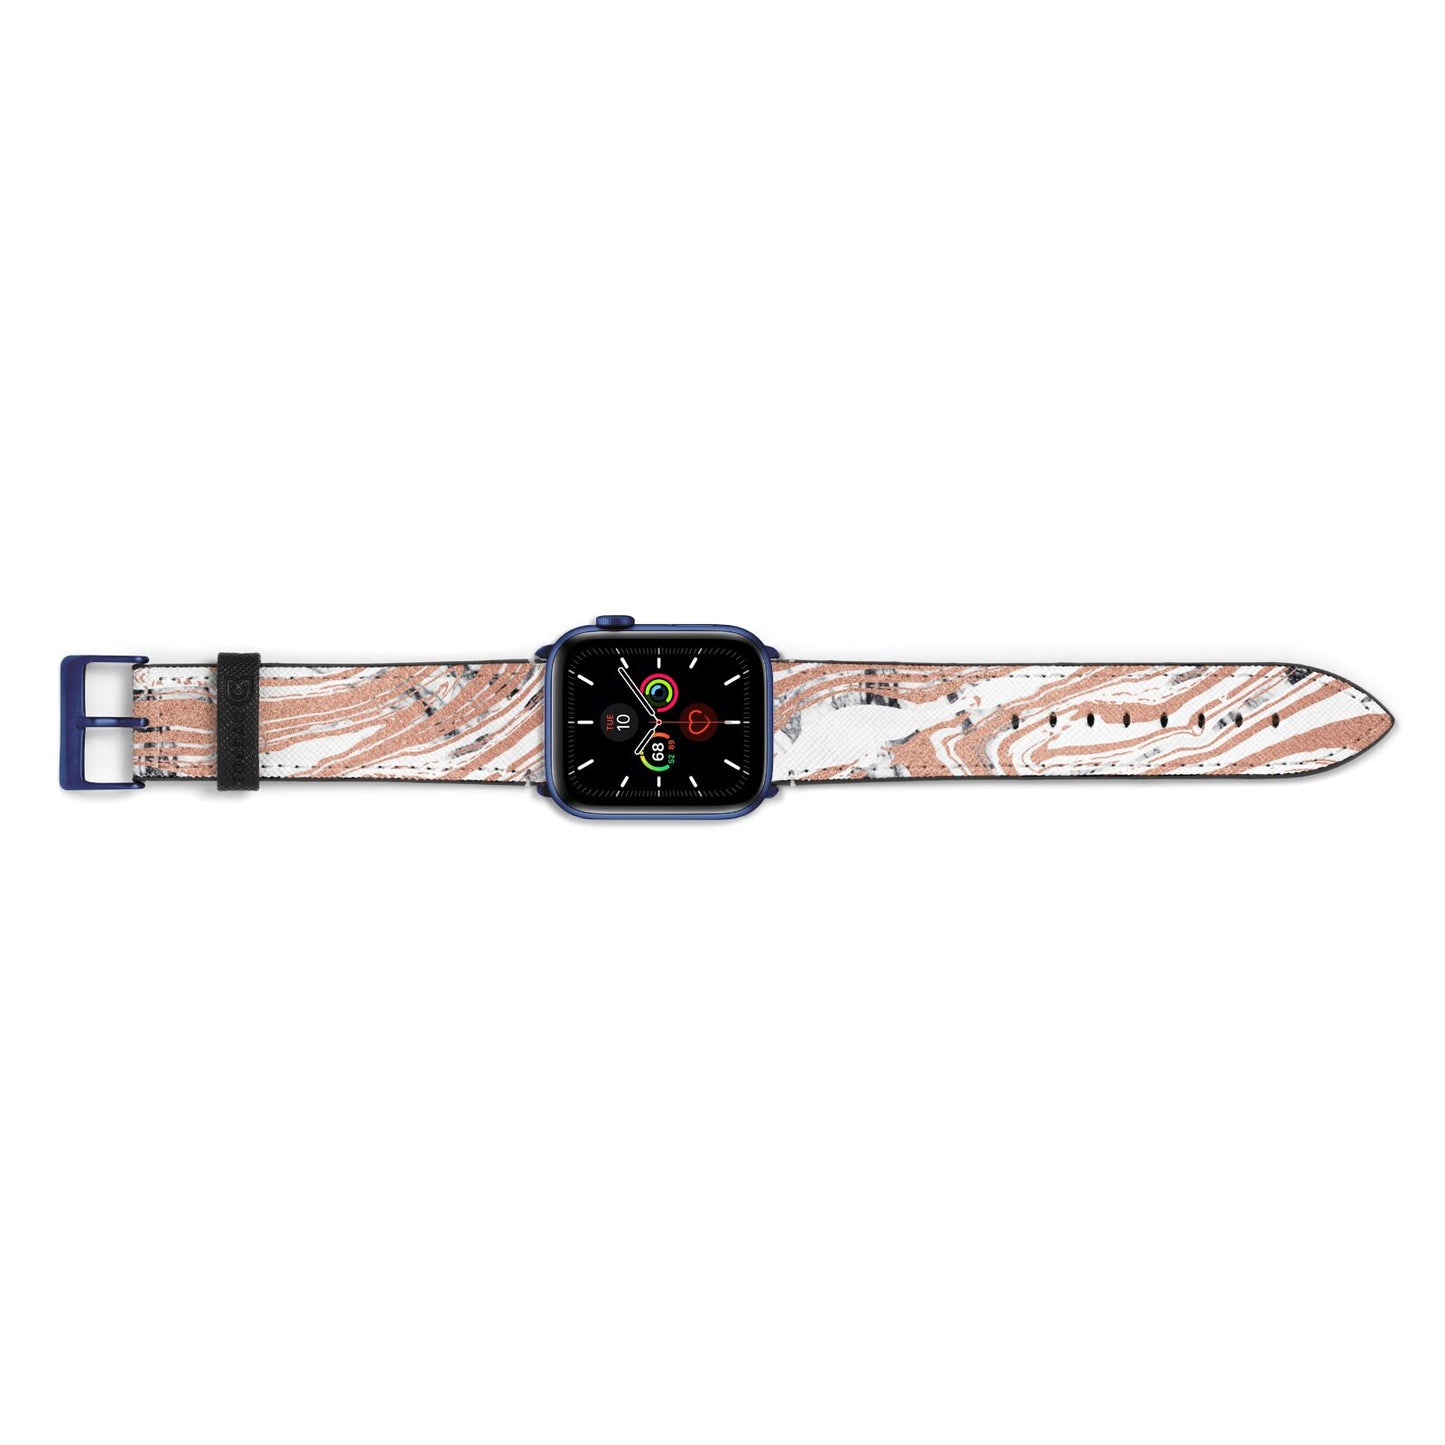 Gold And White Marble Apple Watch Strap Landscape Image Blue Hardware